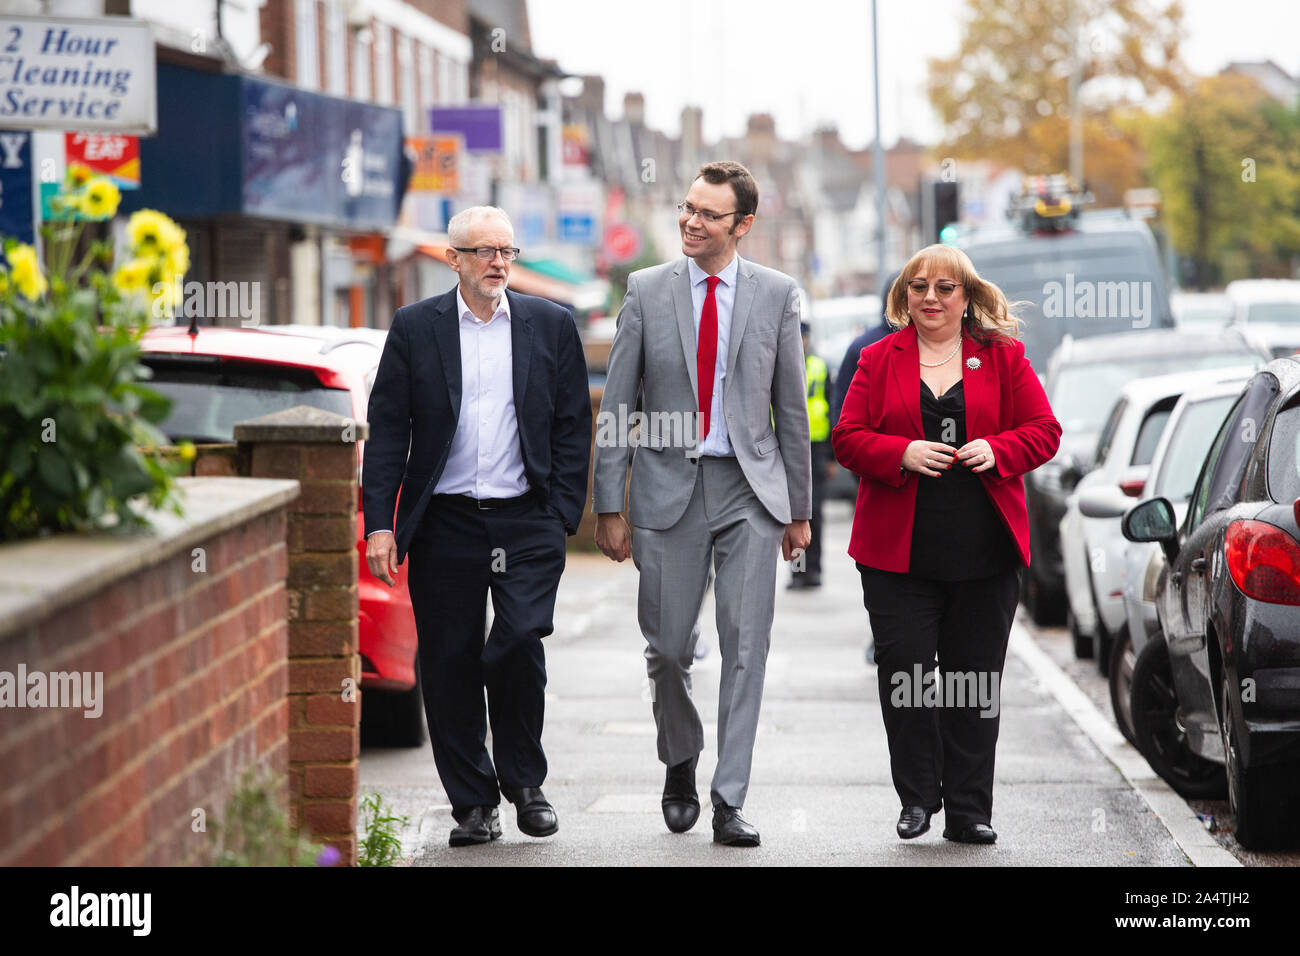 (left to right) Labour leader Jeremy Corbyn, Prospective Parliamentary Candidate Chris Ostrowski and Shadow Health Secretary Sharon Hodgson arrive for a visit to a pharmacy in Watford to talk about his party's NHS plans. PA Photo. Picture date: Wednesday October 16, 2019. See PA story POLITICS Labour. Photo credit should read: Dominic Lipinski/PA Wire Stock Photo